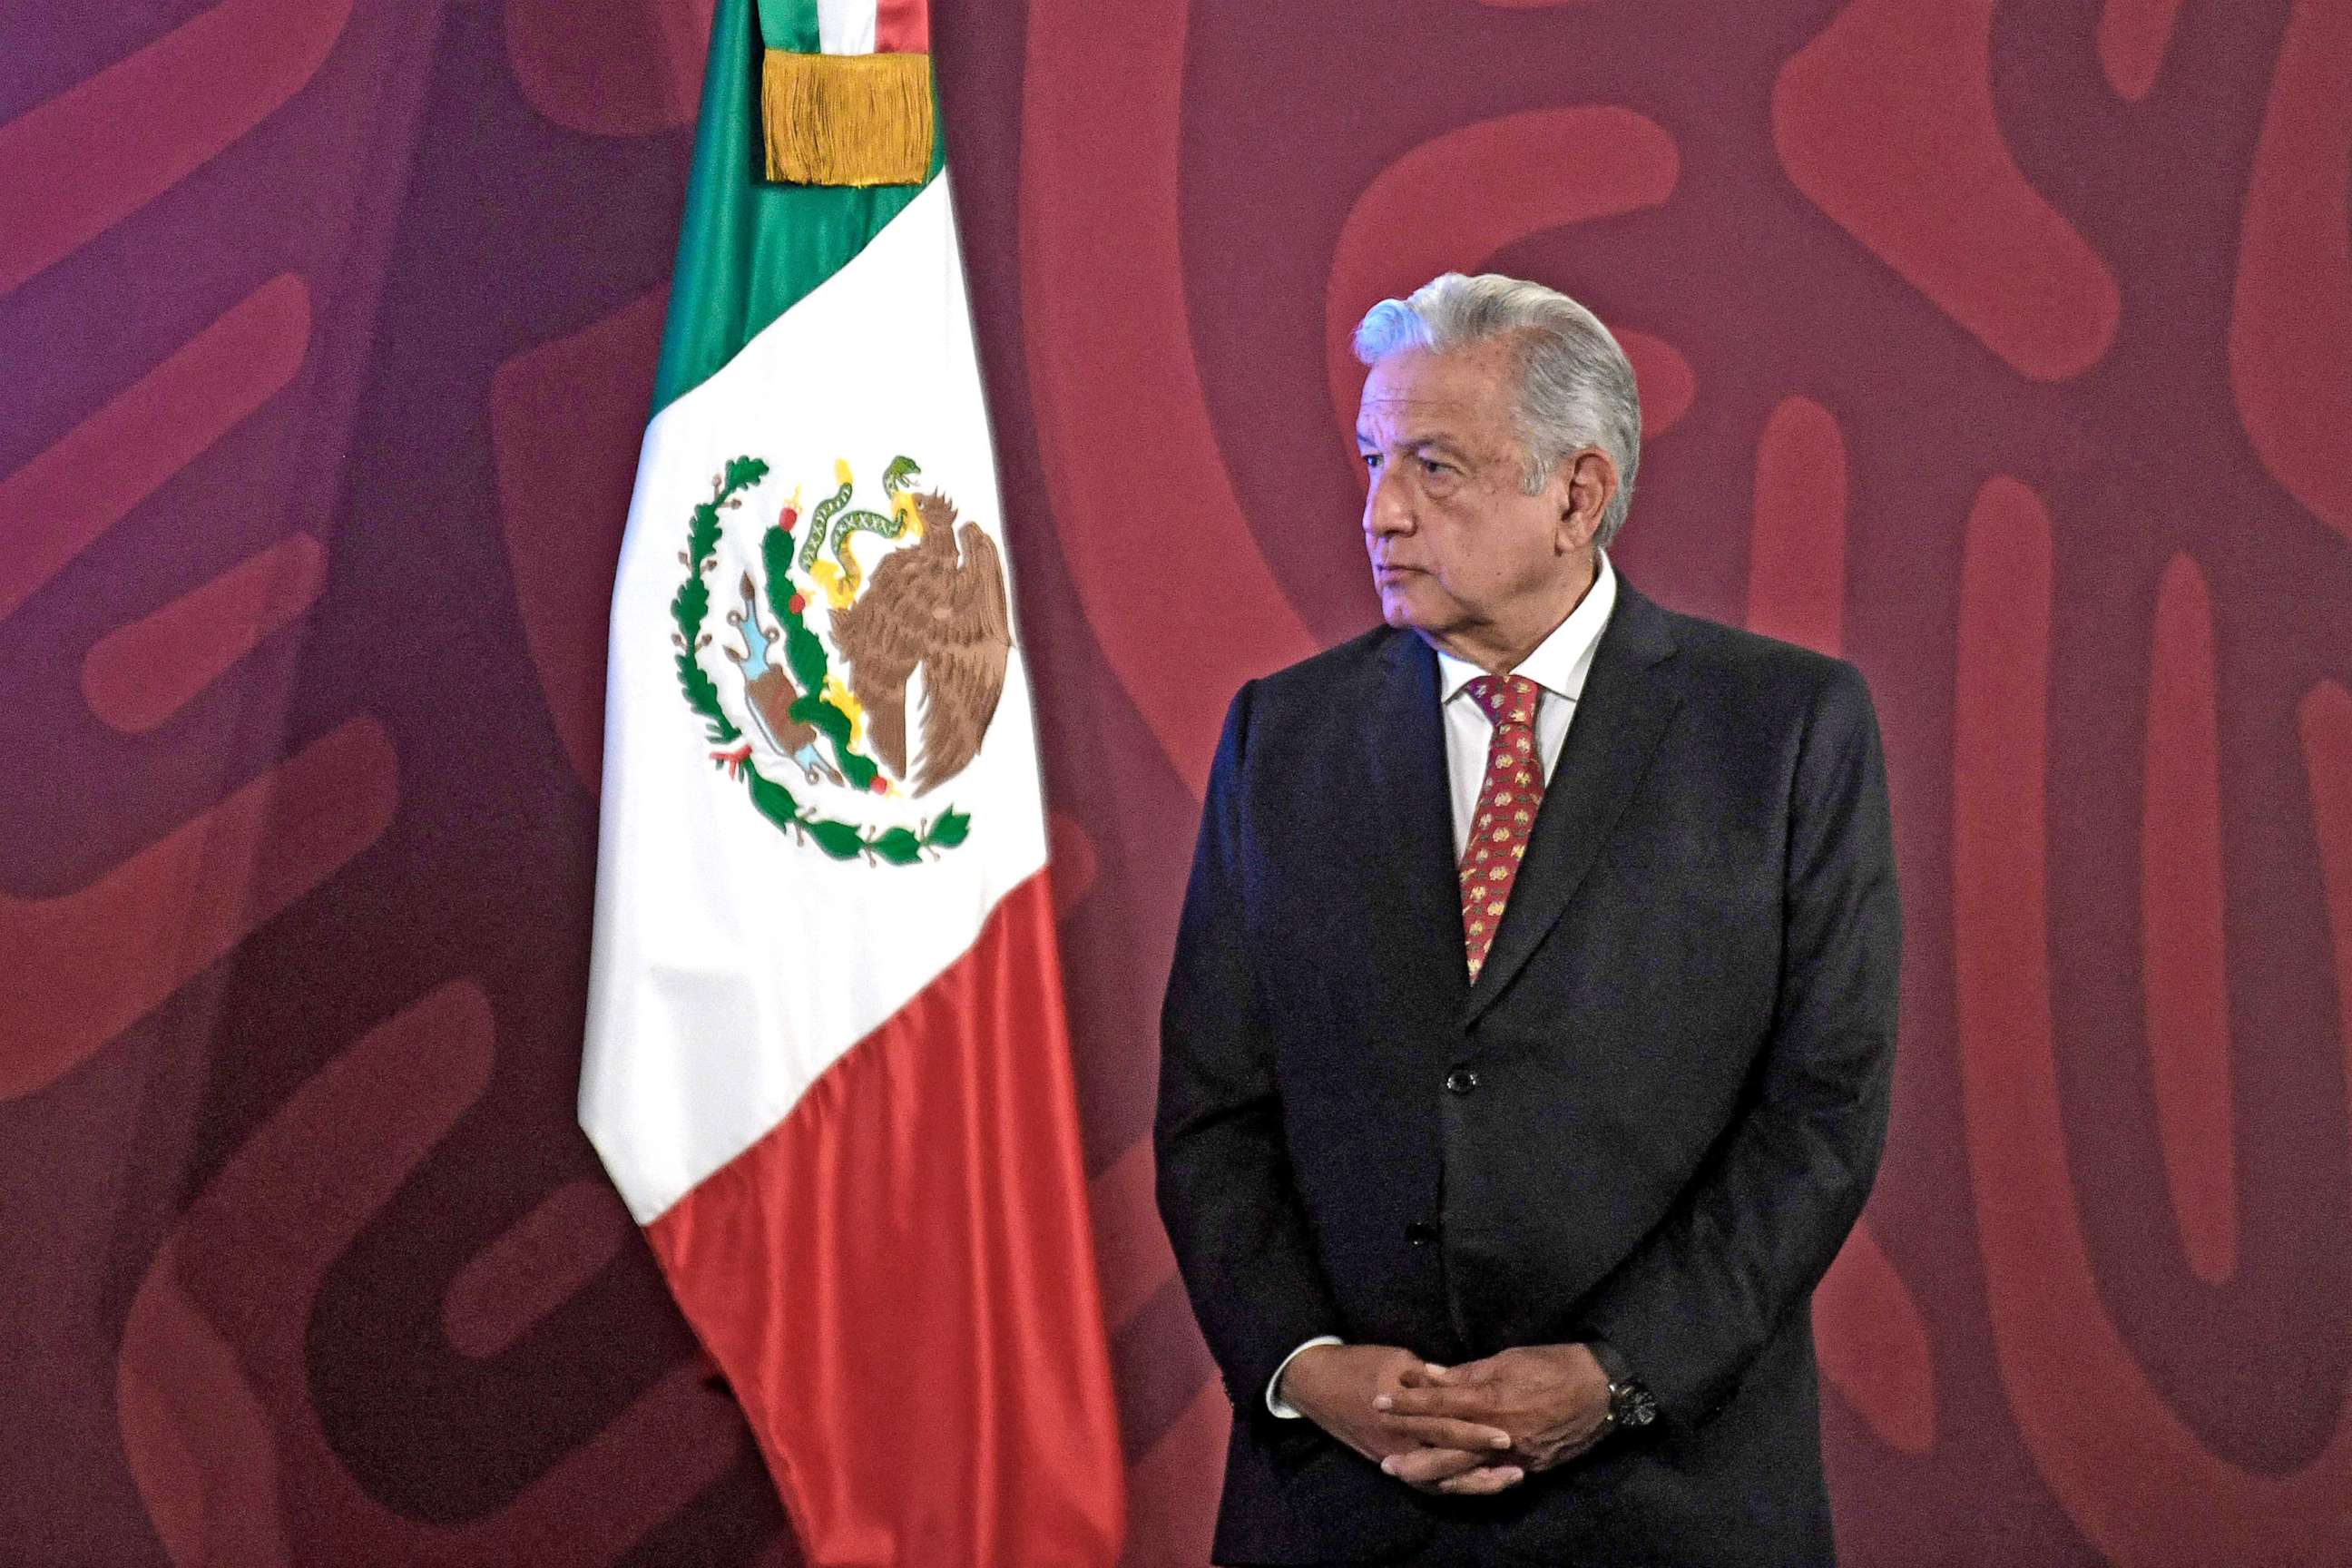 PHOTO: Mexico's President Andres Manuel Lopez Obrador is seen during his daily morning press conference in Mexico City on June 6, 2022.